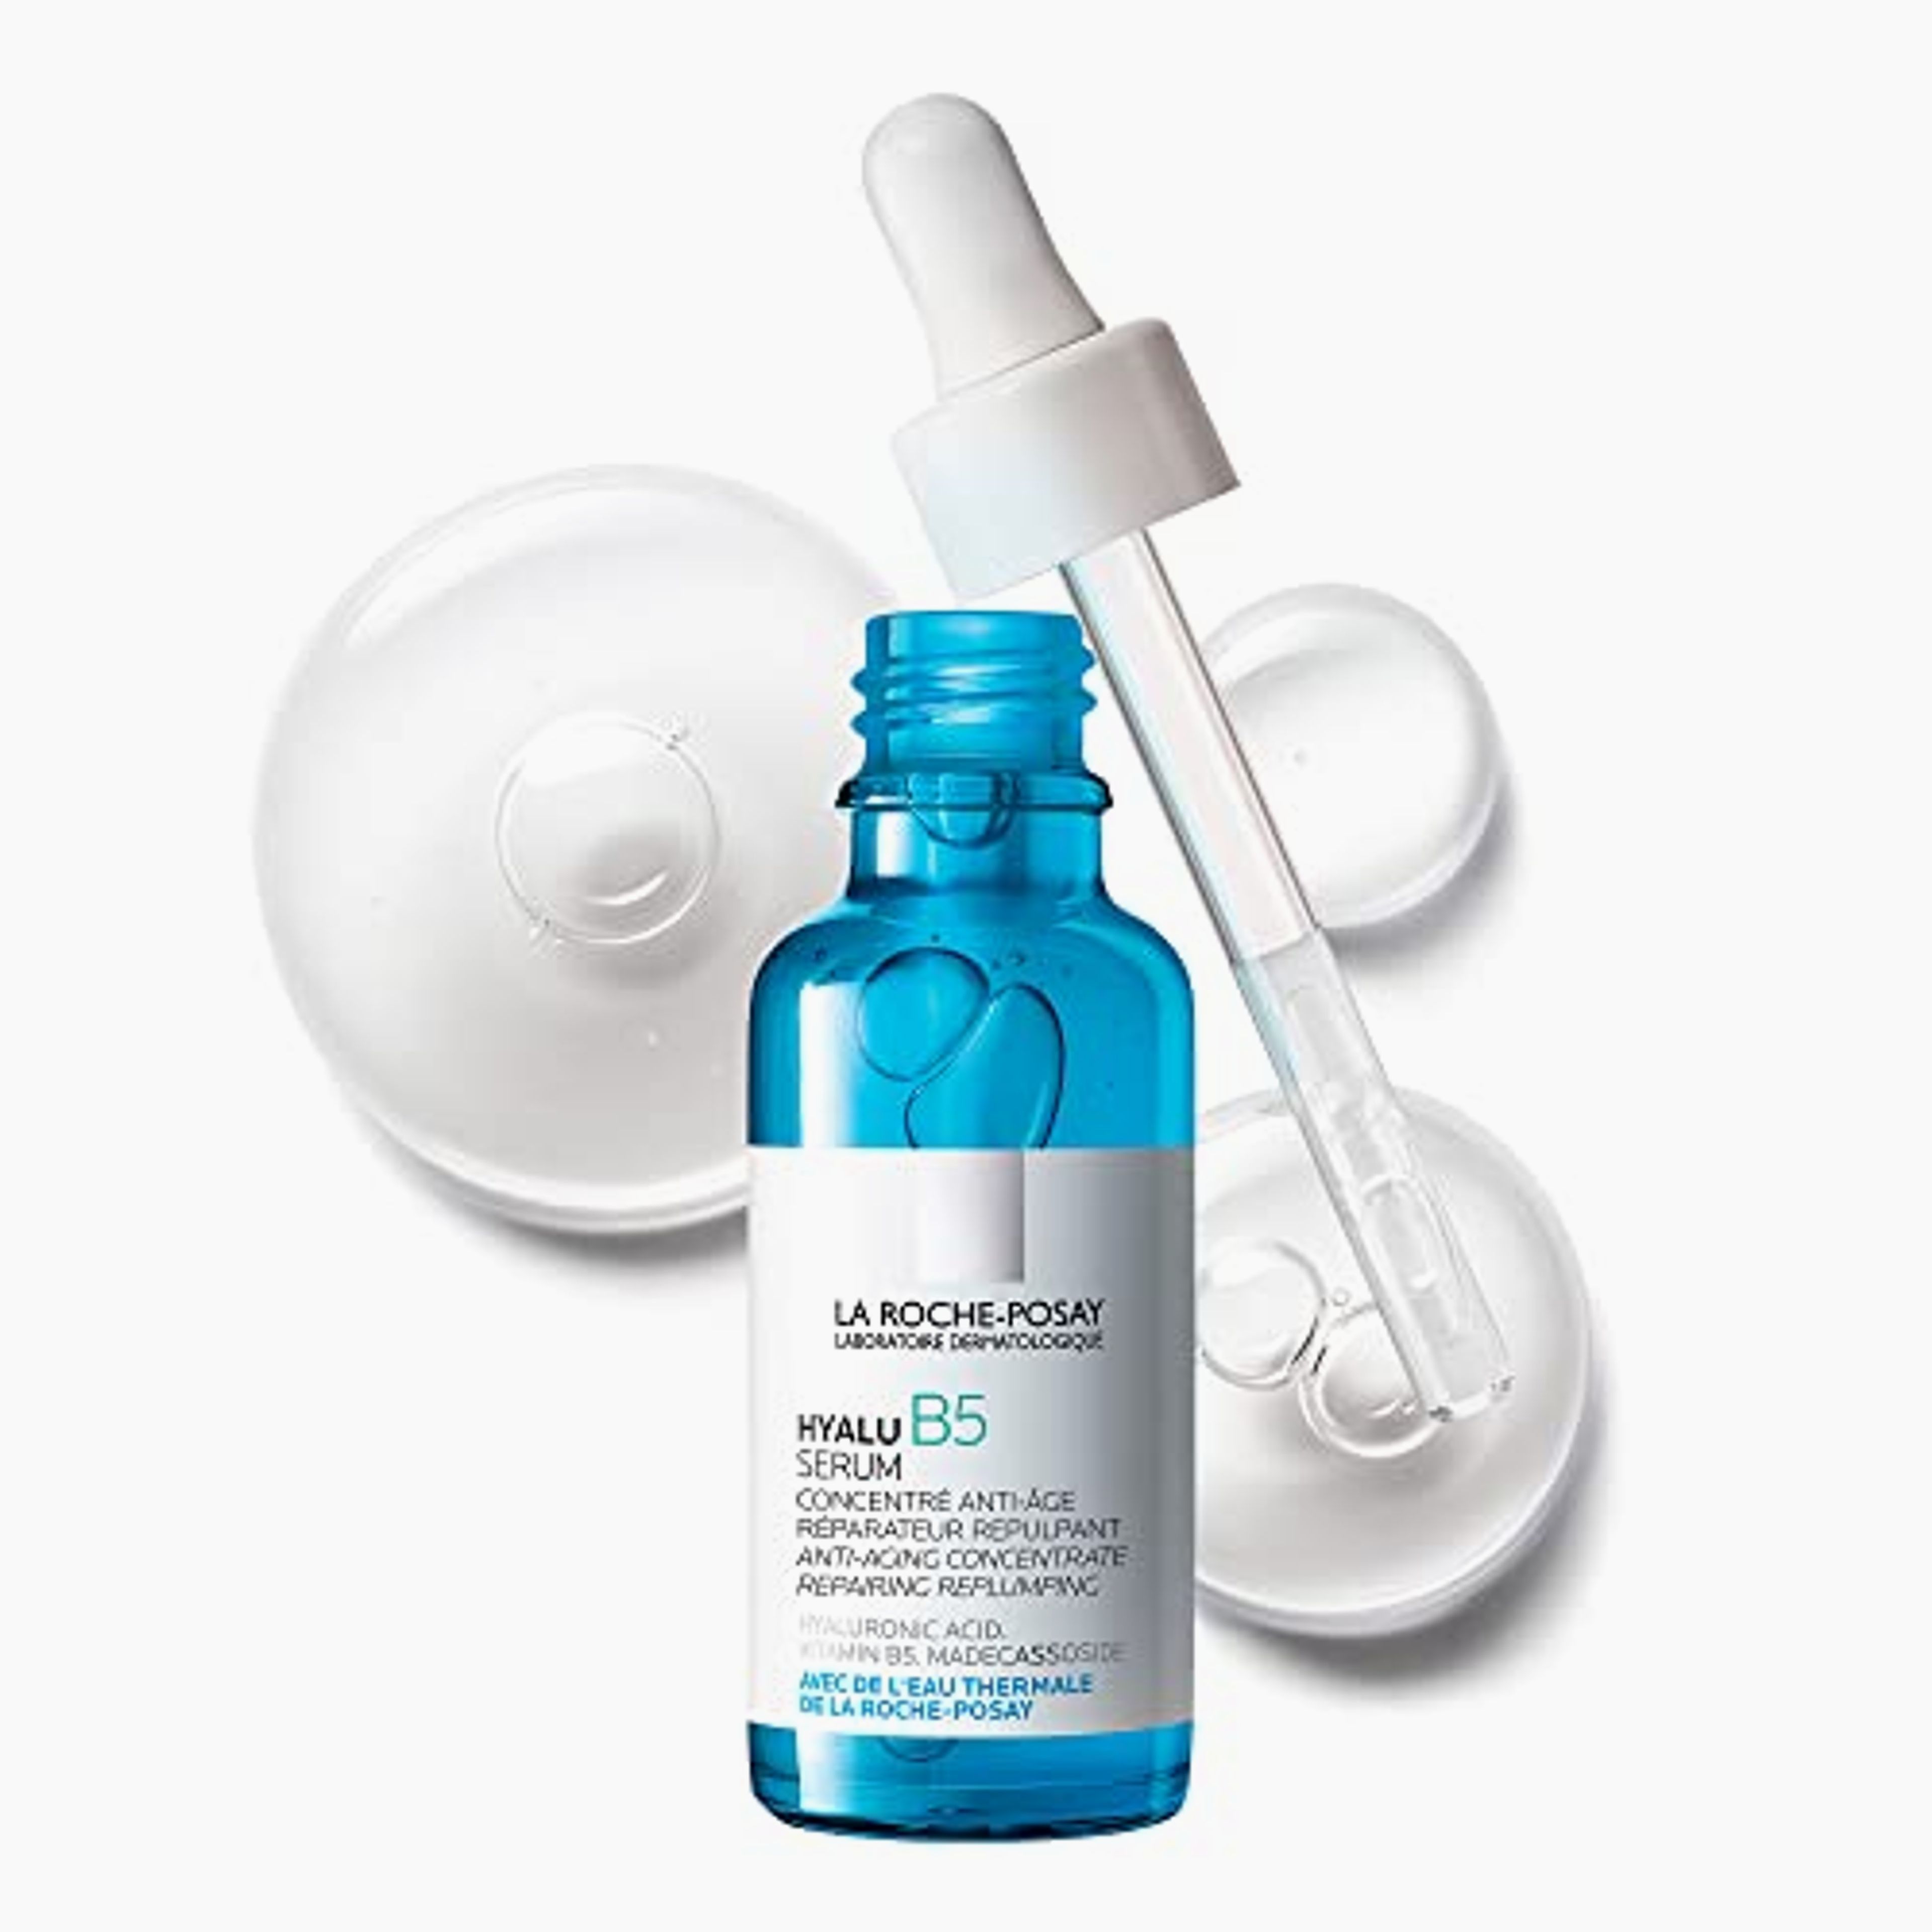 La Roche-Posay Hyalu B5 Pure Hyaluronic Acid Serum for Face, with Vitamin B5, Anti-Aging Serum for Fine Lines and Wrinkles, Hydrating Serum to Plump and Repair Dry Skin, Safe on Sensitive Skin